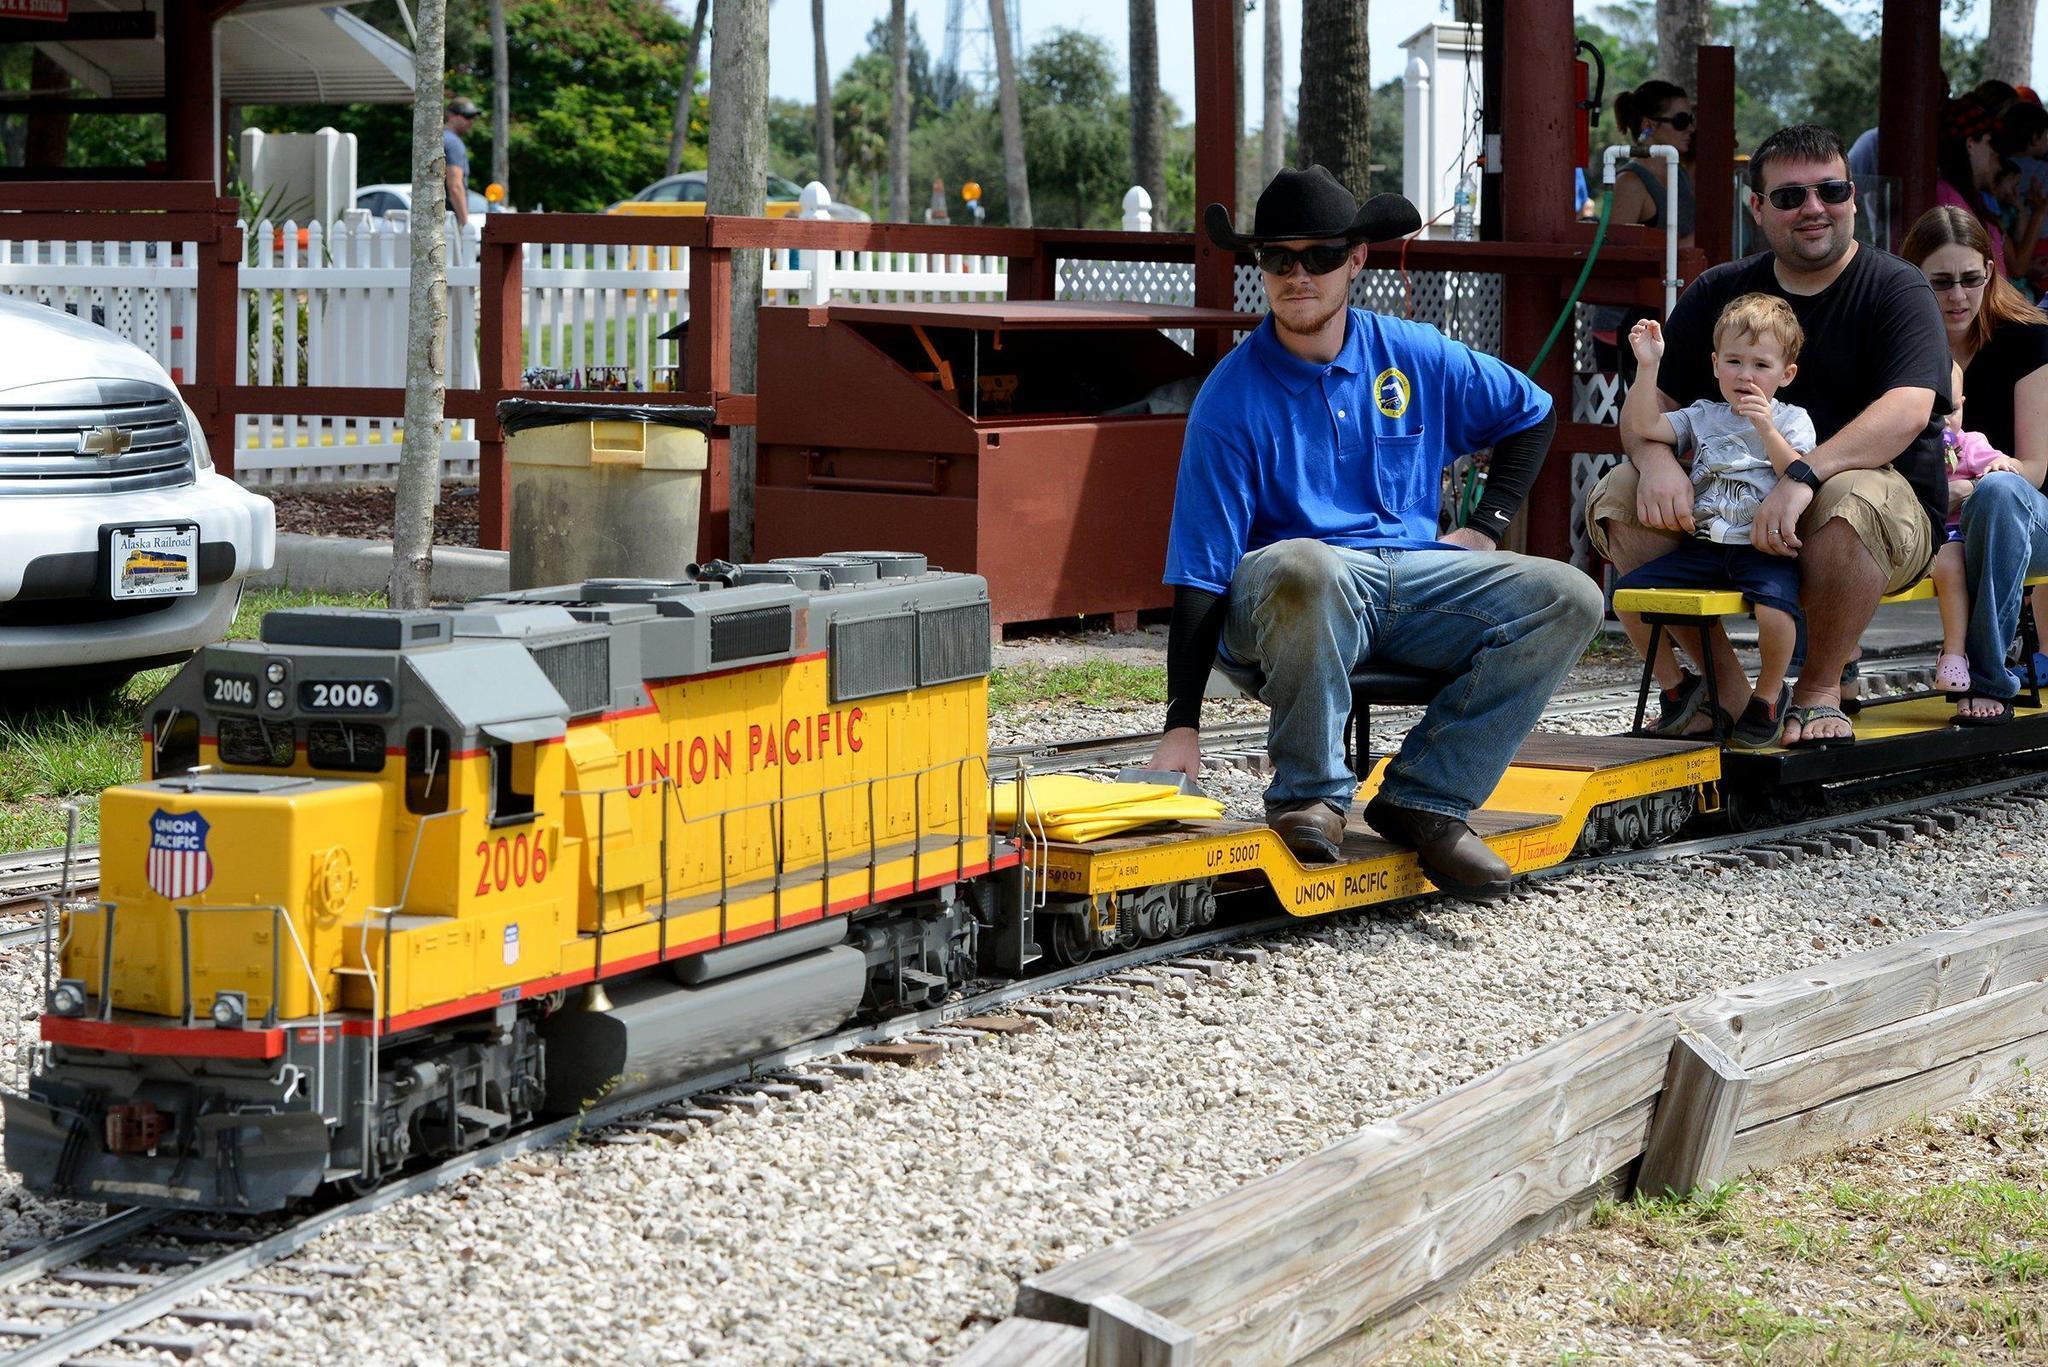 Second generation keeps the Tradewinds train tradition on track ...